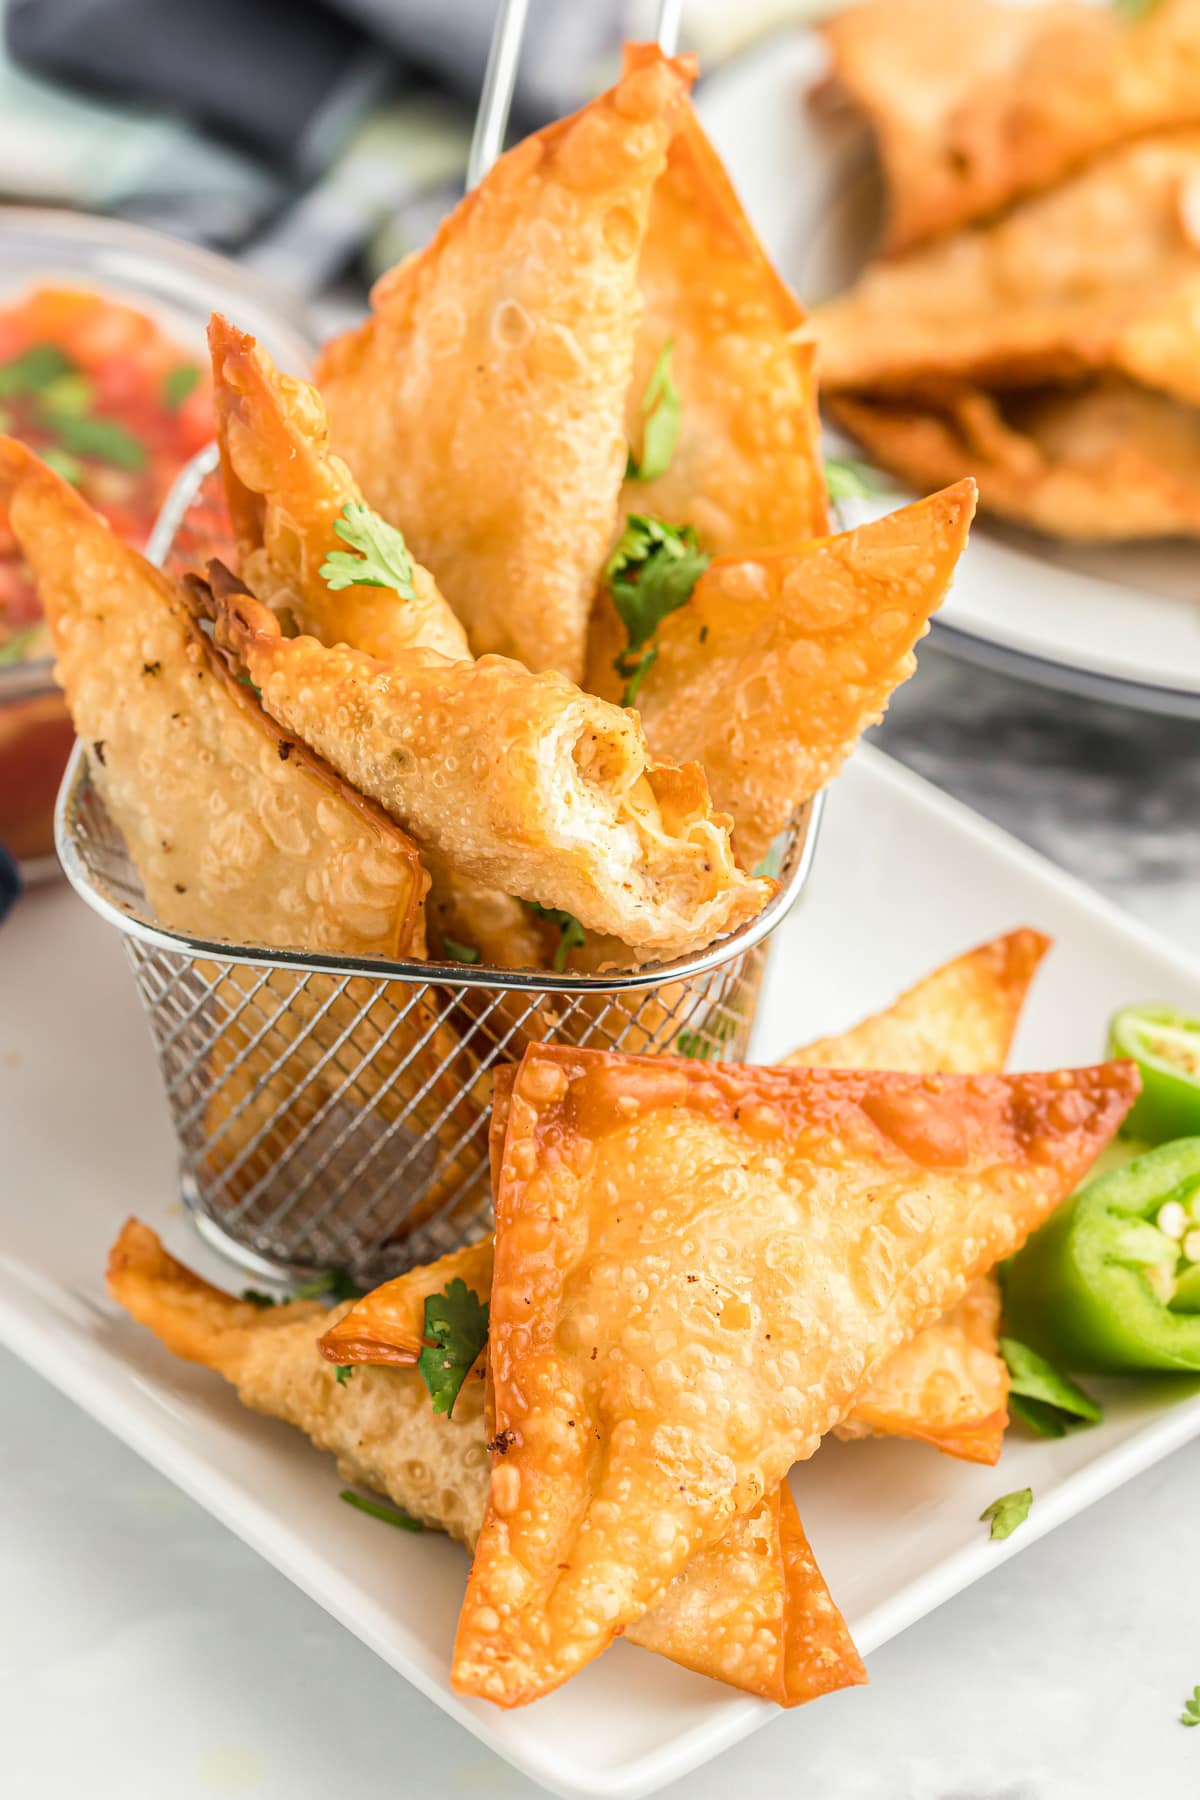 Fried mexican wontons in a basket served with salsa.